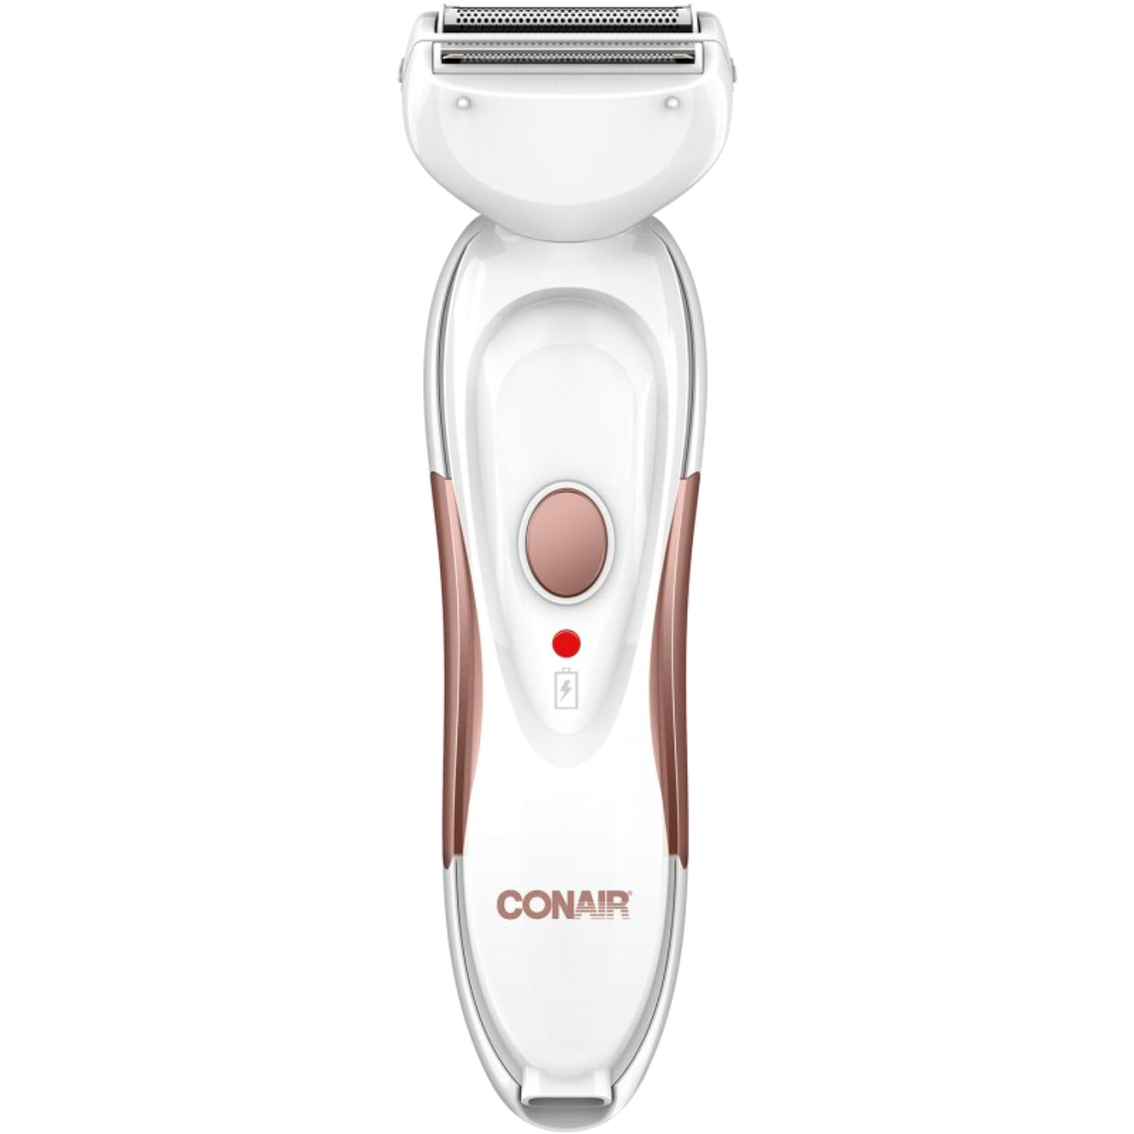 Conair All in One Shave and Trim Cordless and Rechargeable System - Image 1 of 10